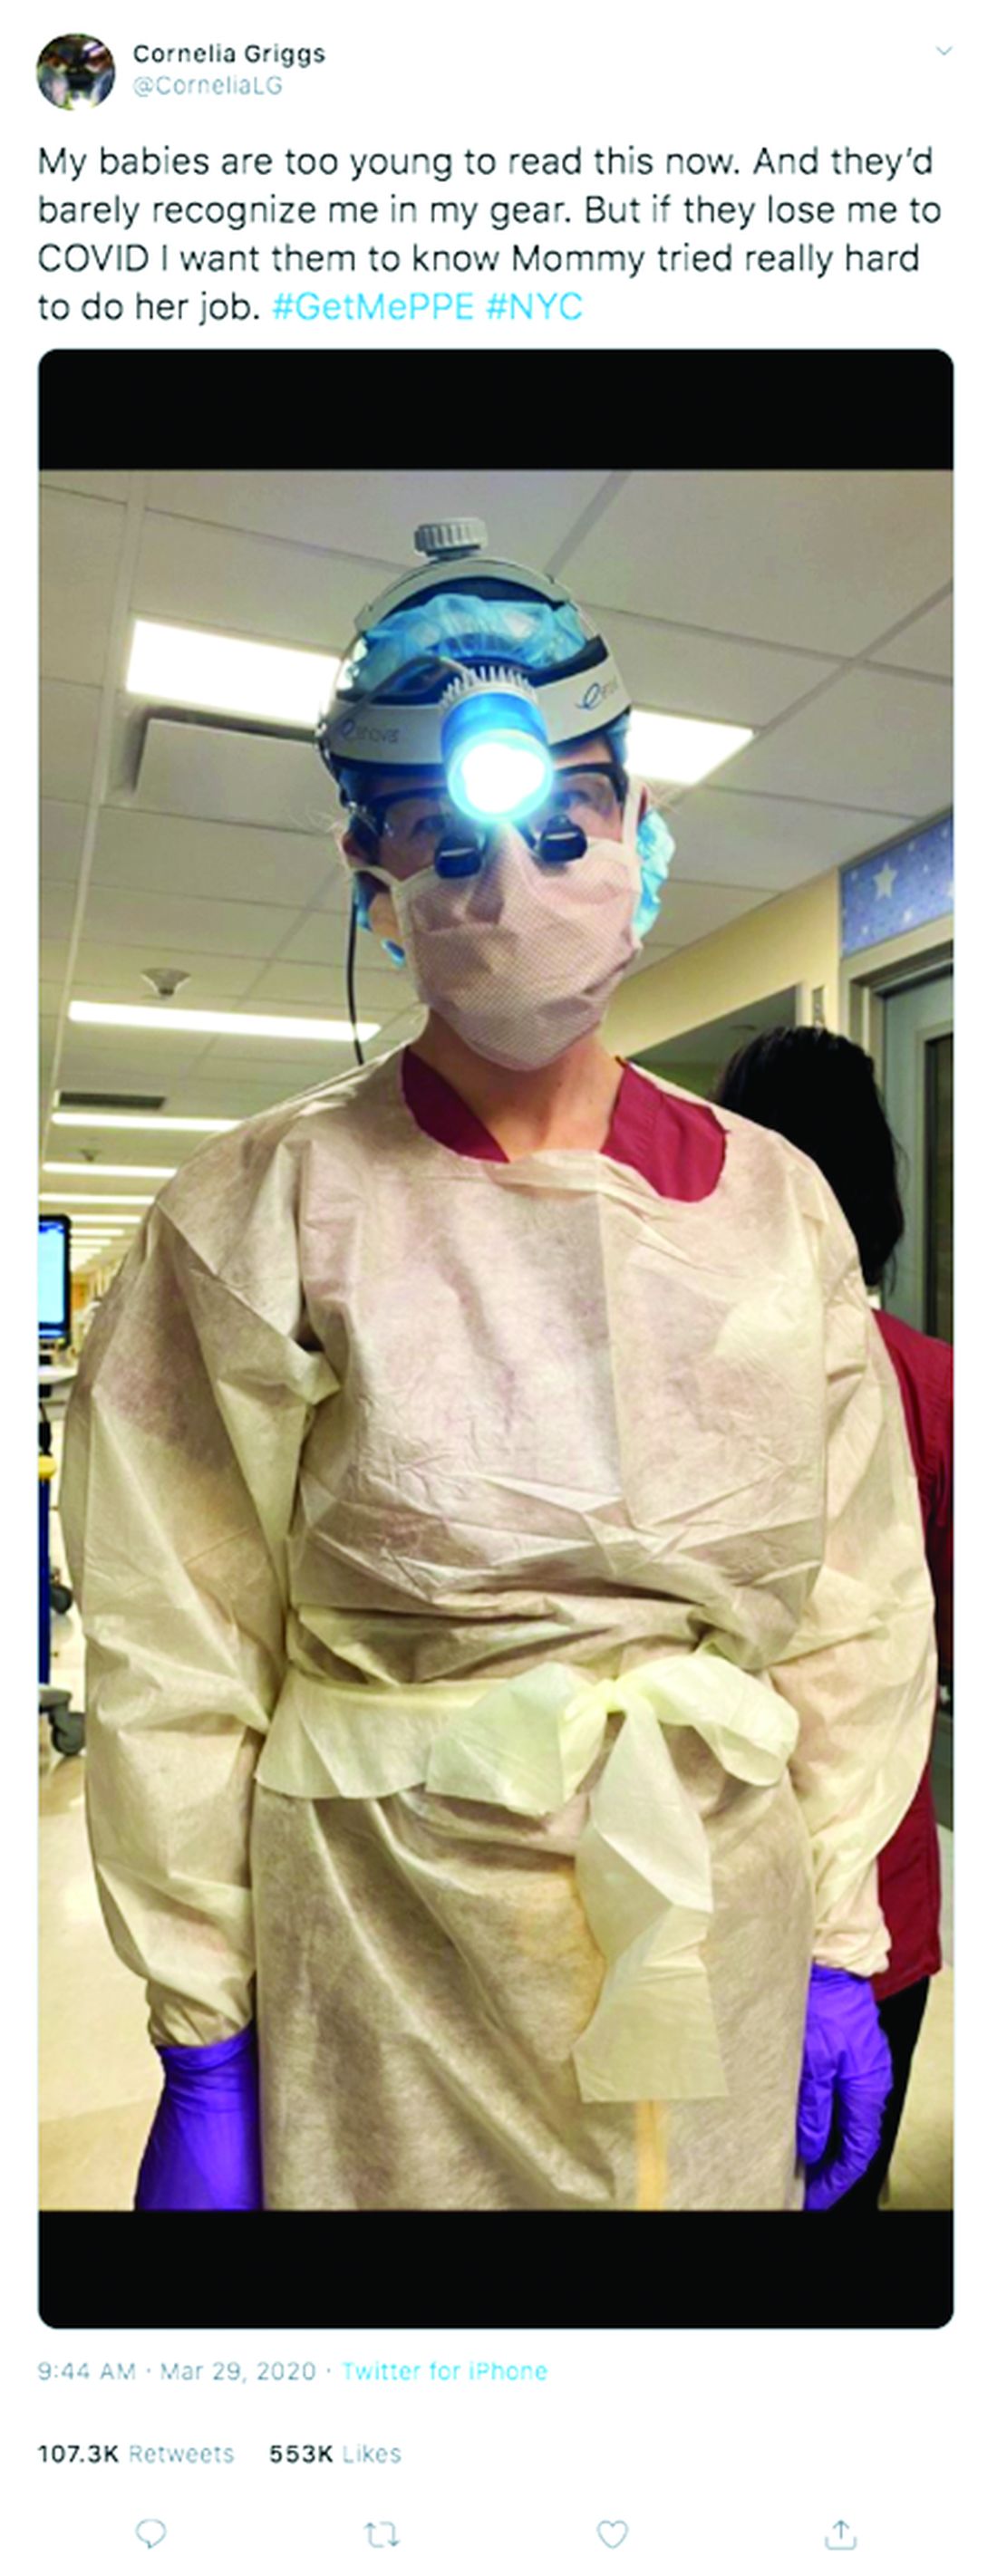 A tweet by Dr. Cornelia Griggs includes a photo of her in protective hospital gear.